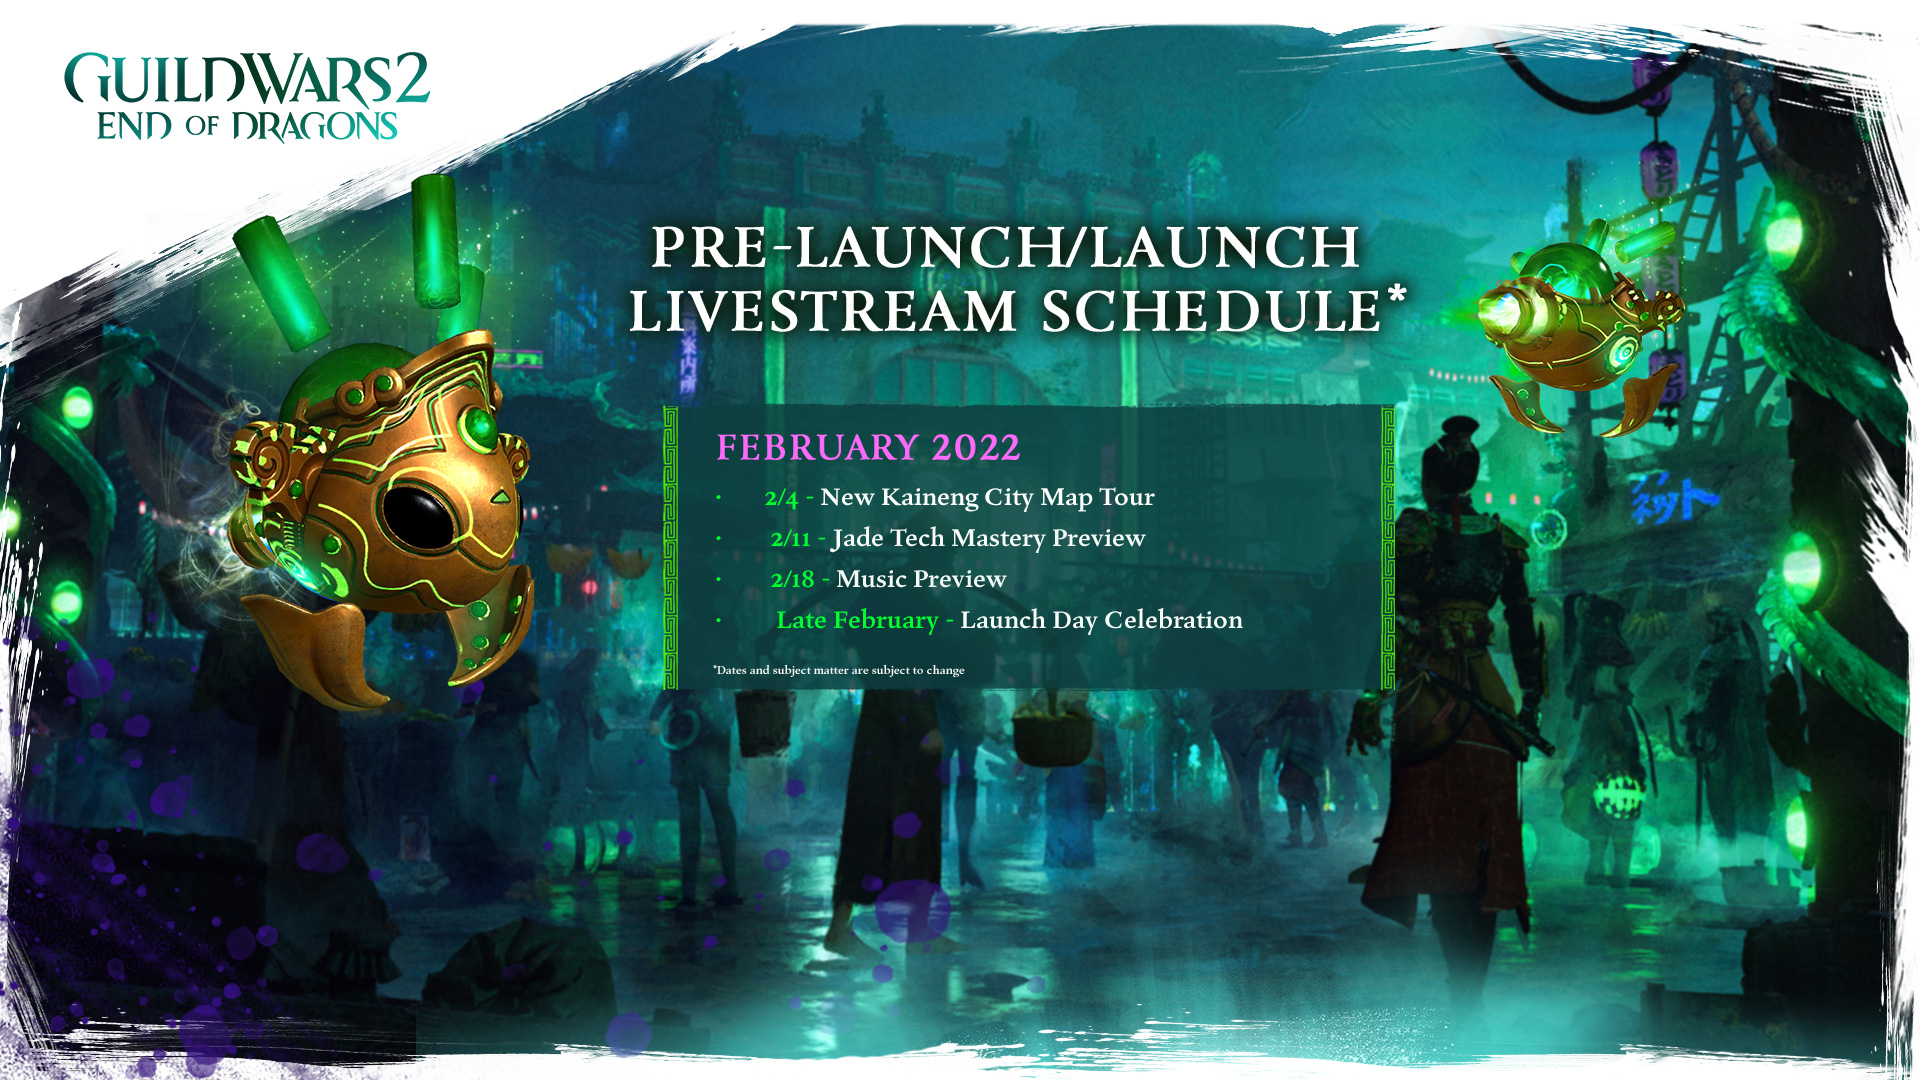 Guild Wars 2 Release Launch Schedule for End of Dragons